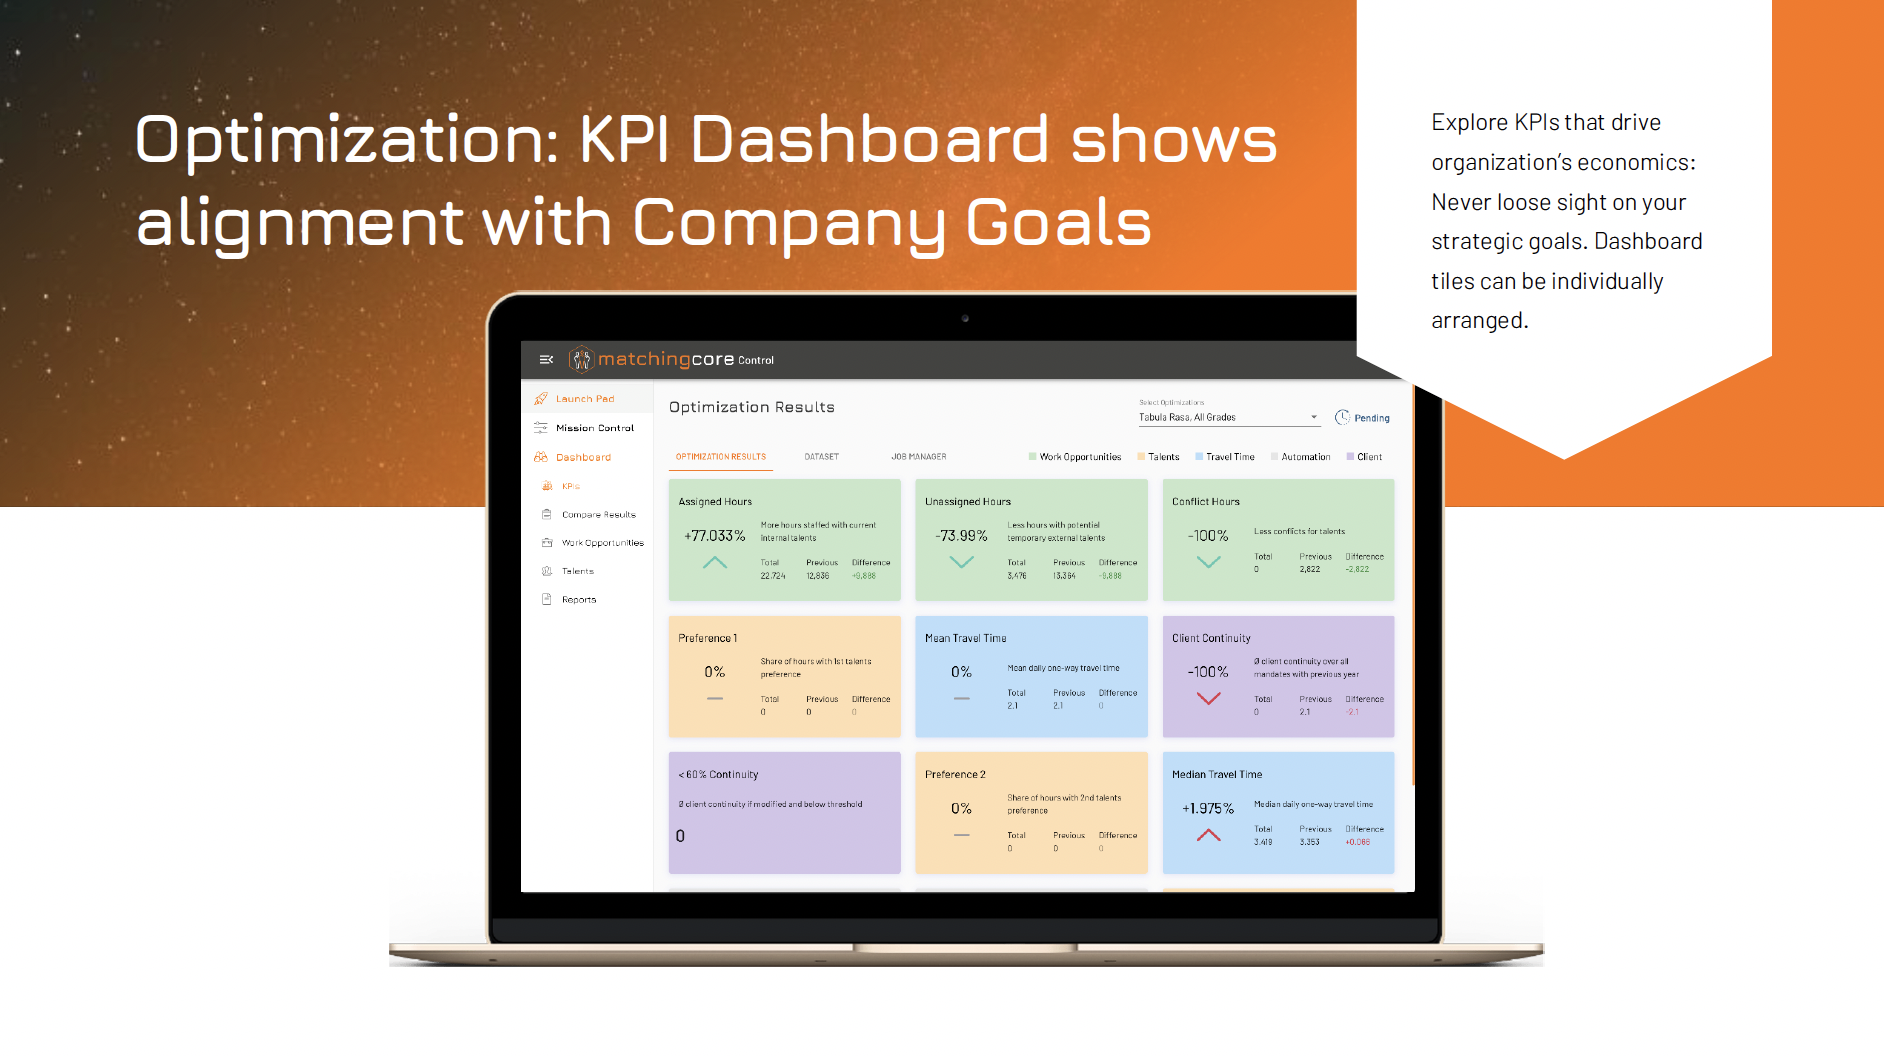 Optimization: KPI Dashboard shows alignment with Company Goals